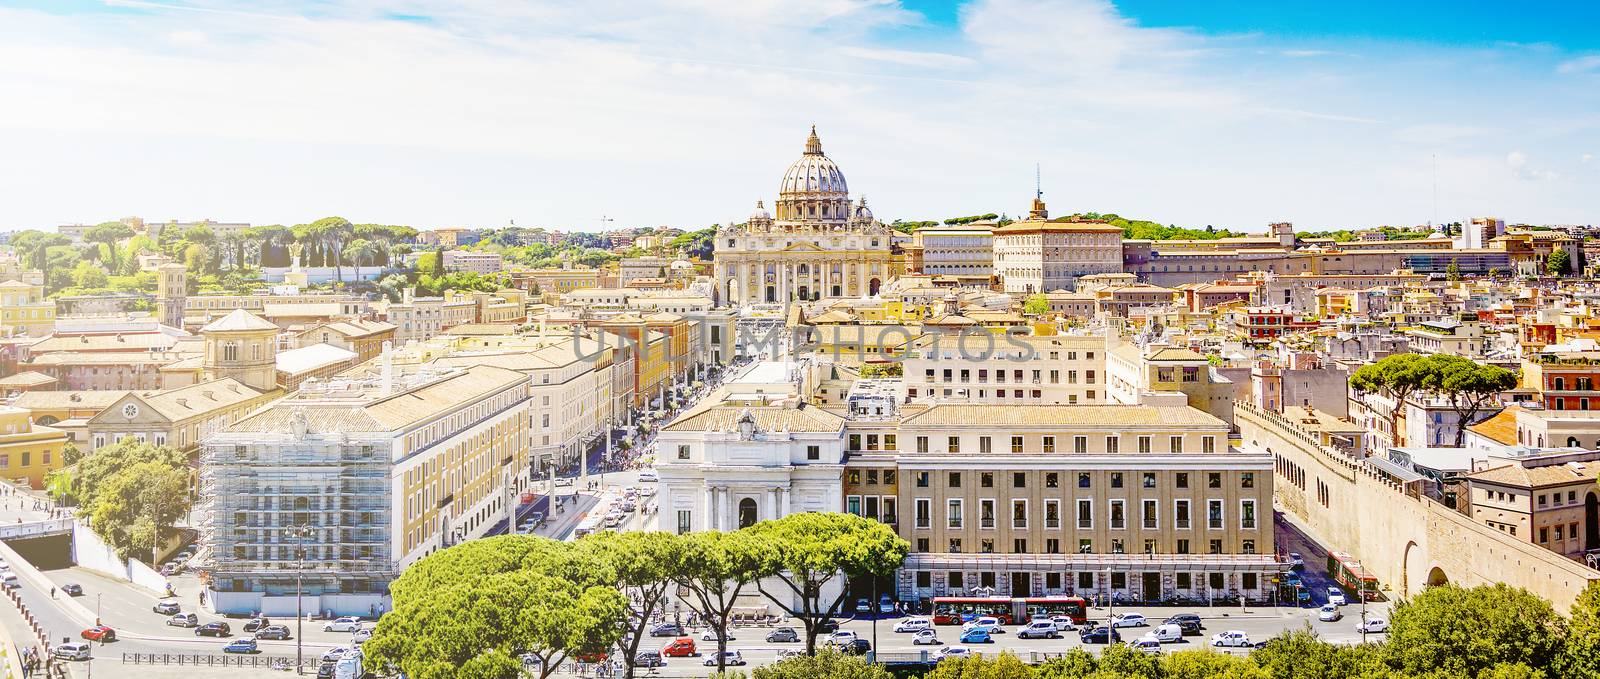 panoramic view of Rome with the dome of St. Peter in the skyline